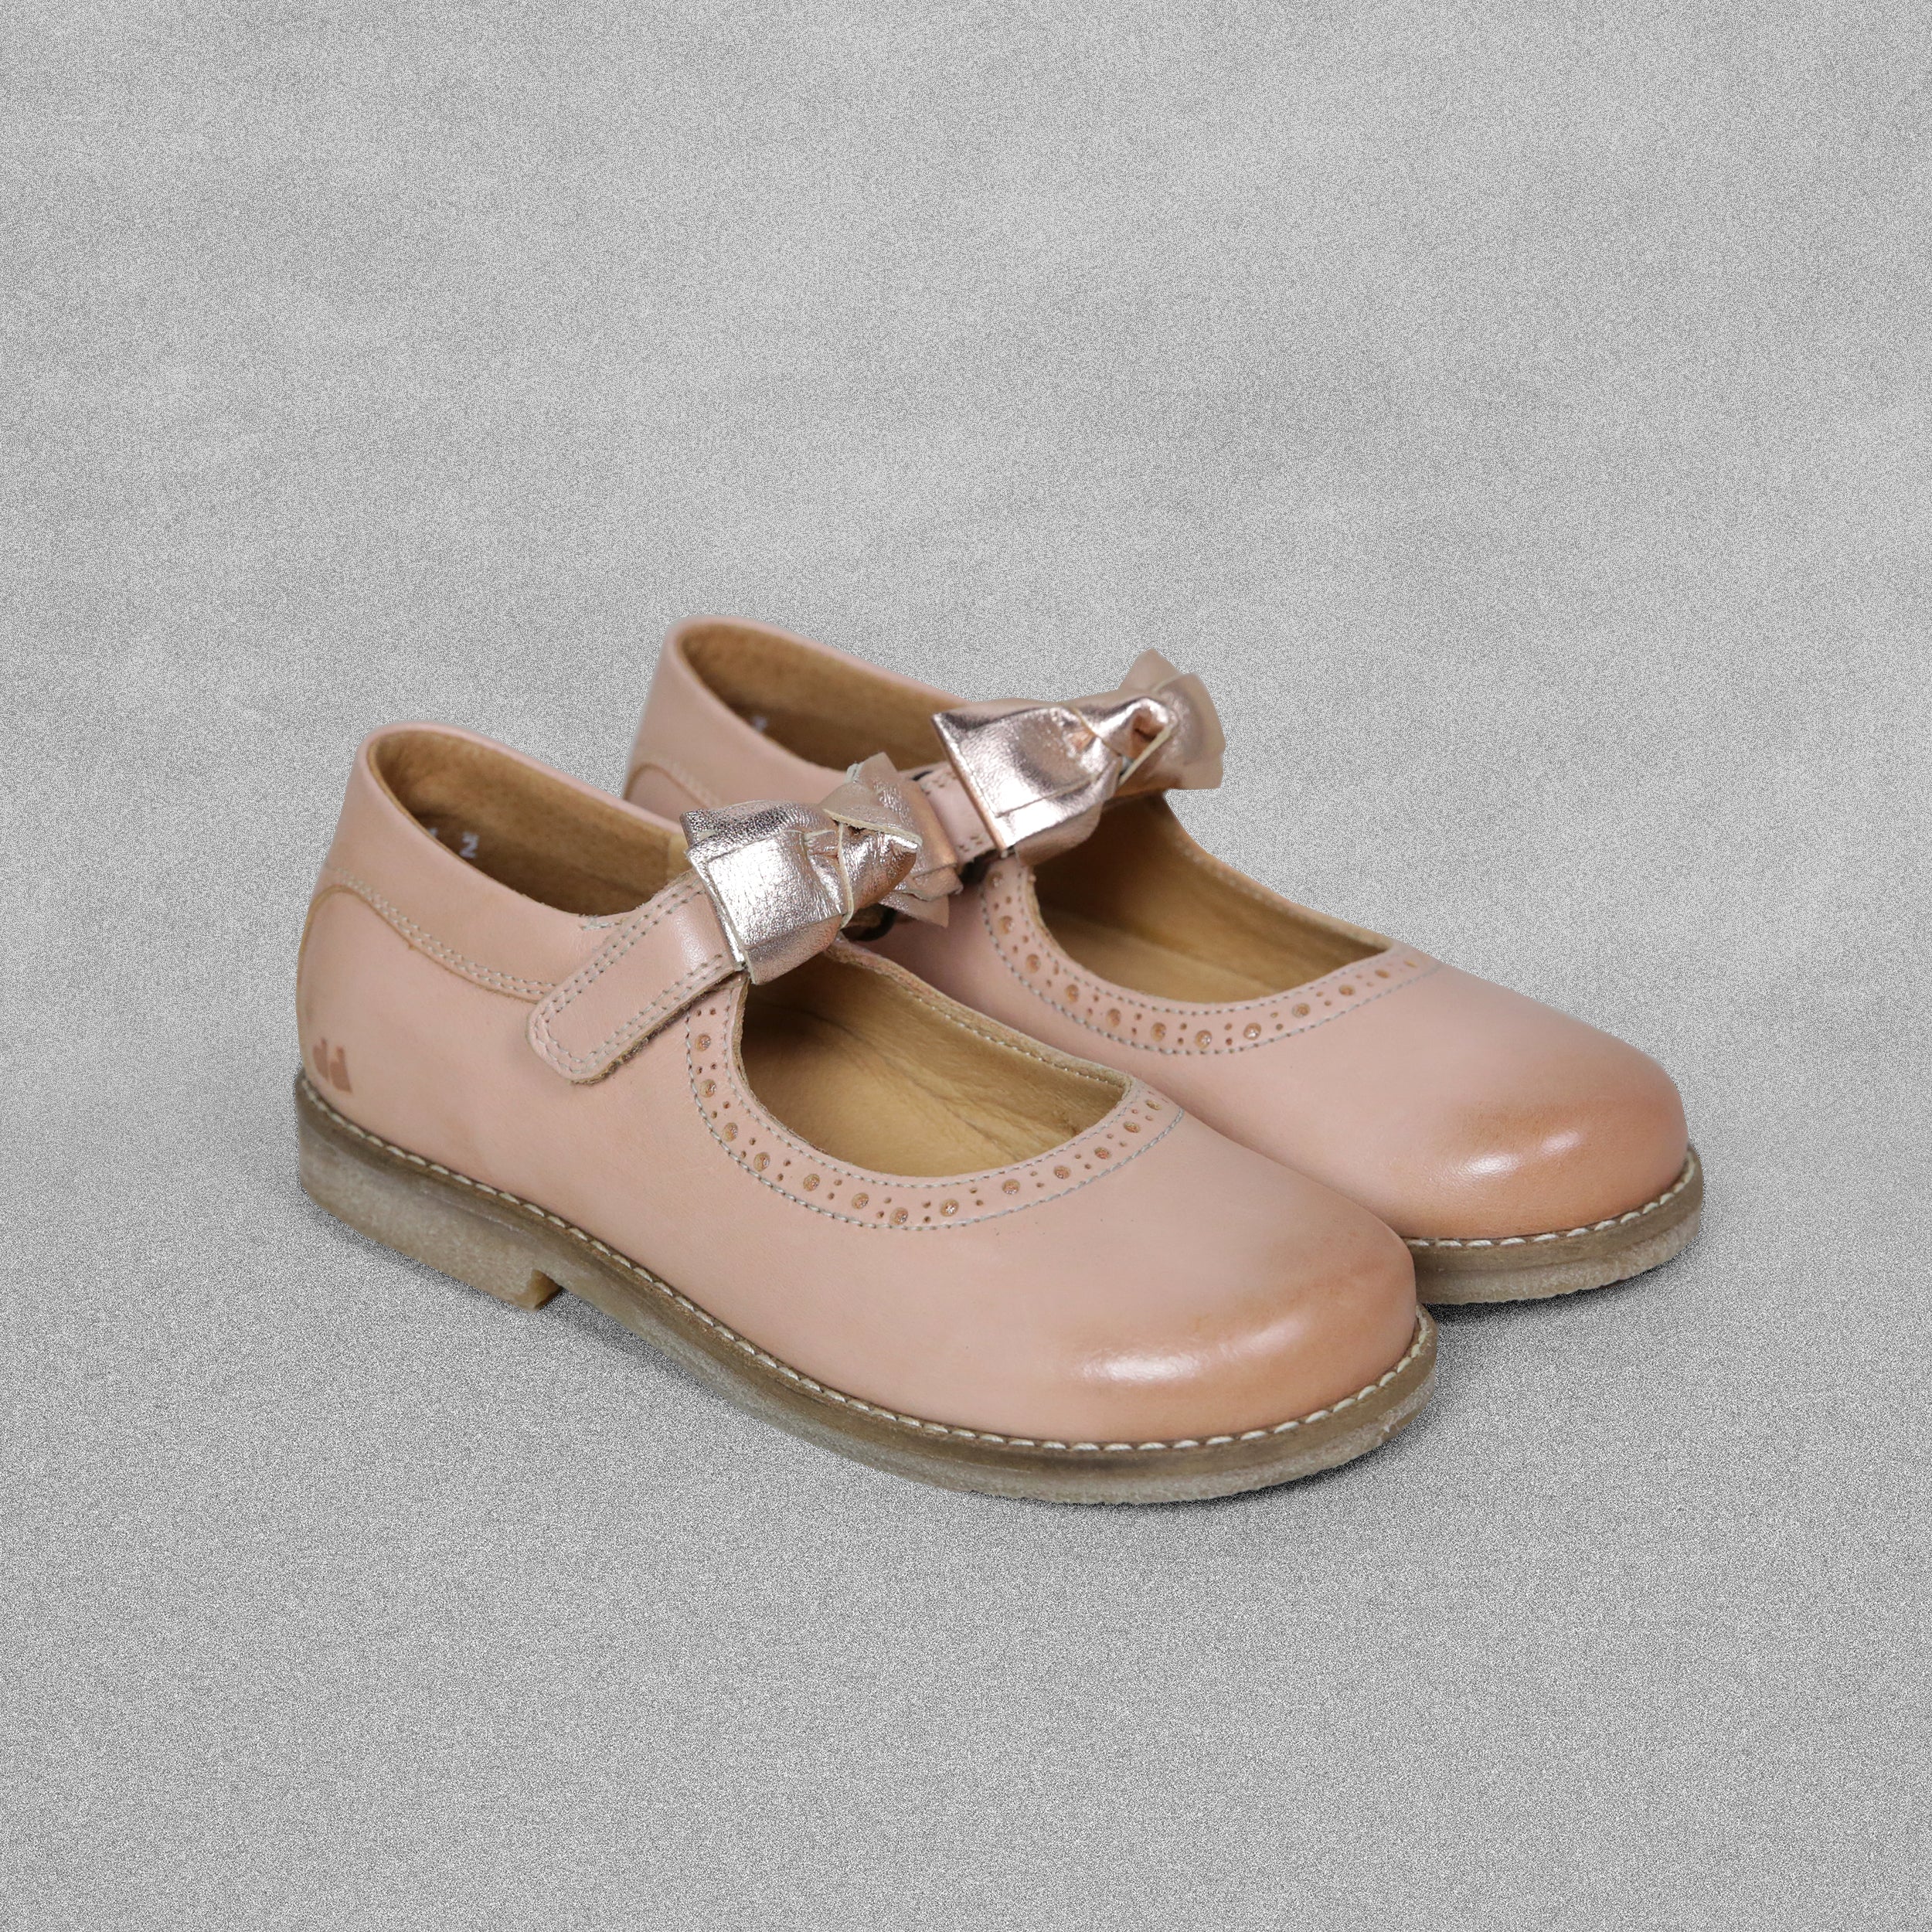 'Froddo' Mary Jane Papaya Shoes with Removable Bow Detail